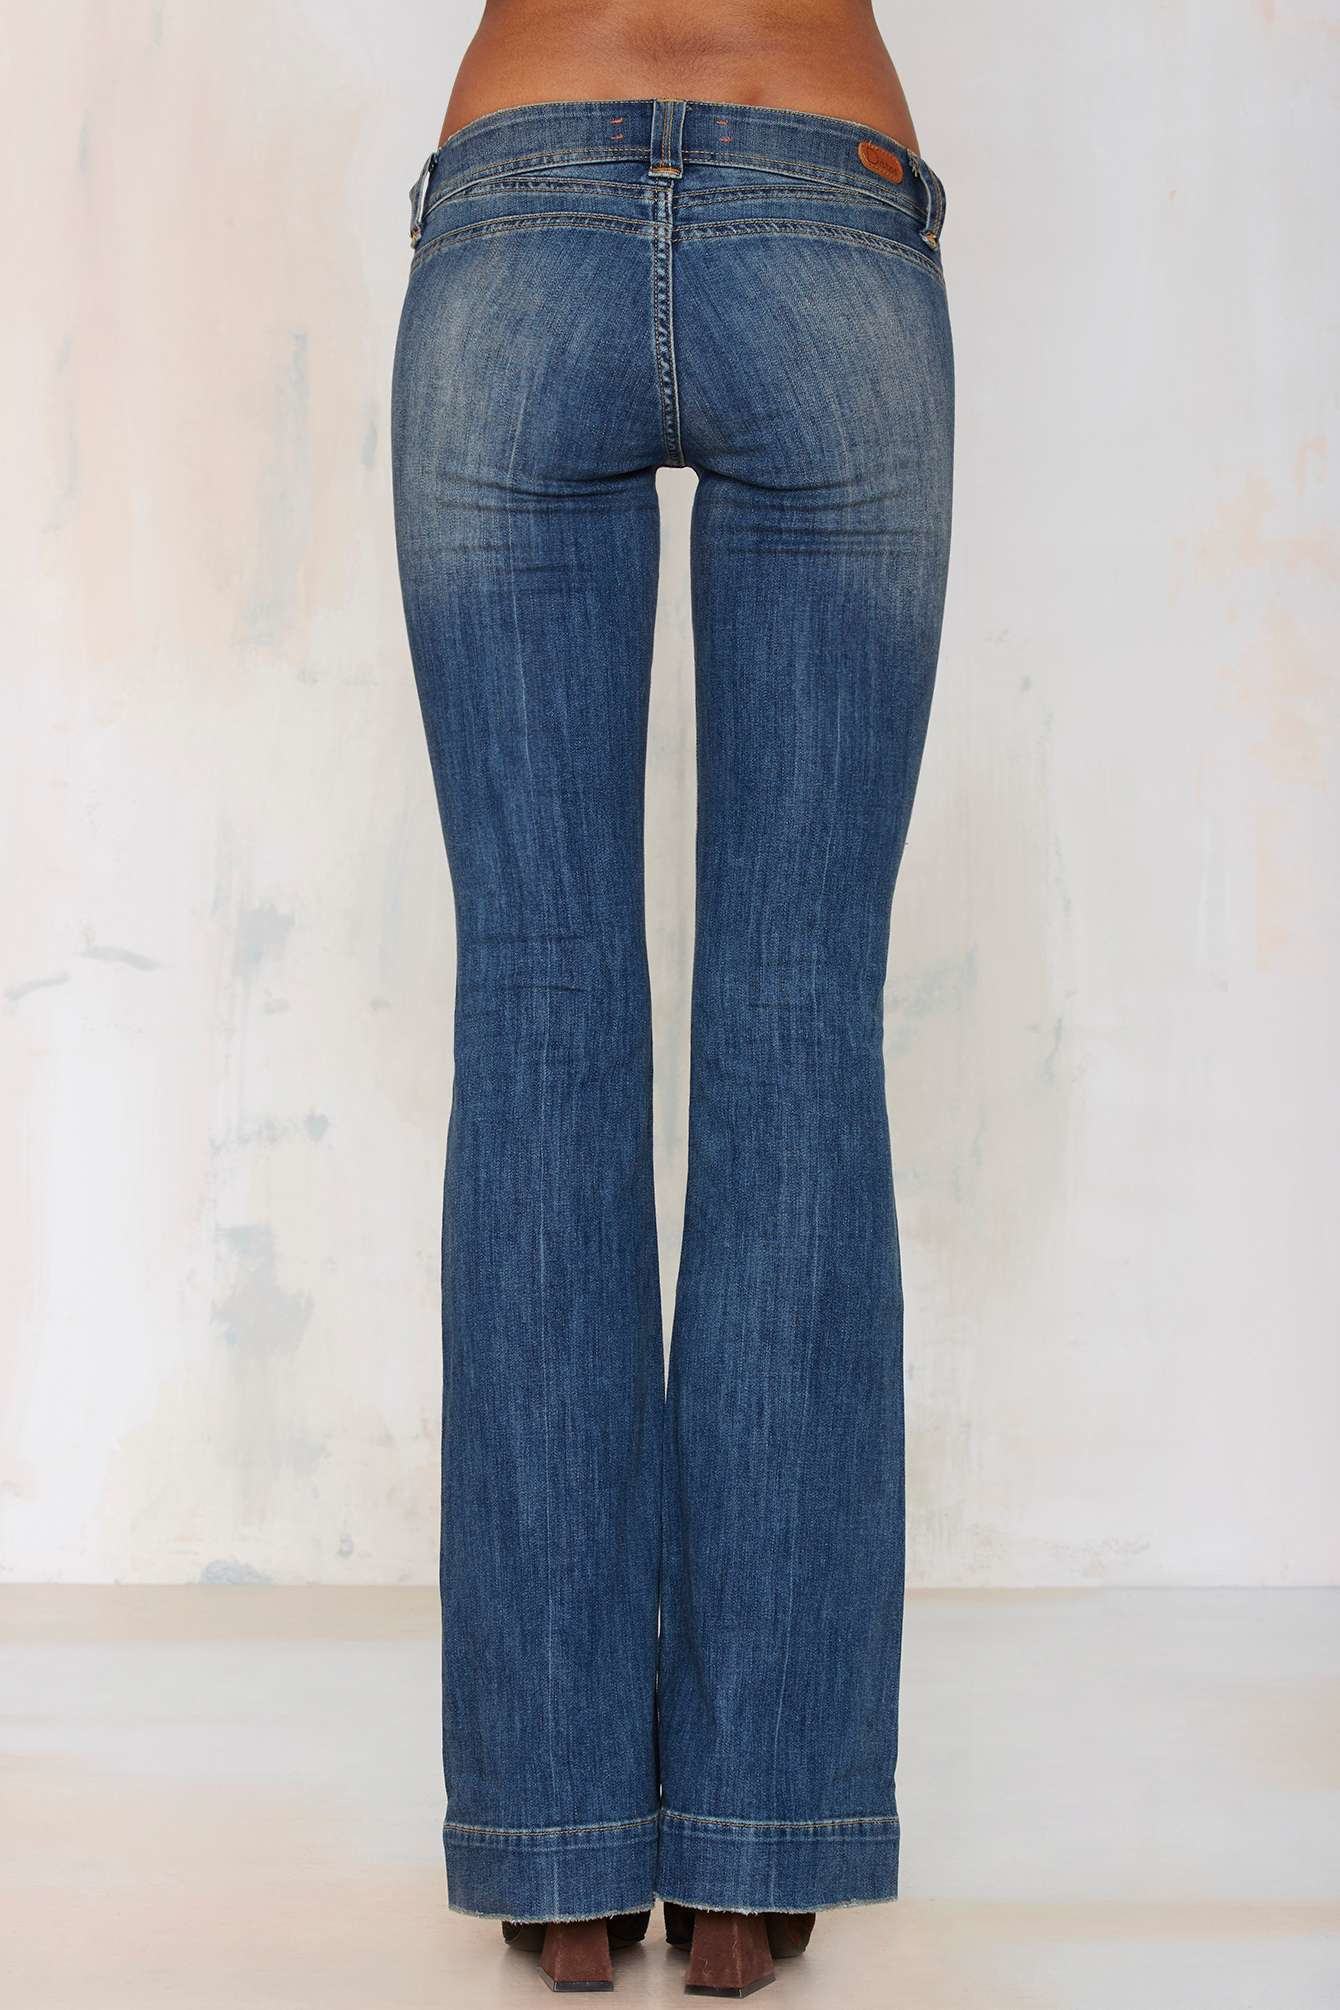 Dittos Aretha Low-rise Flare Jean in Blue - Lyst